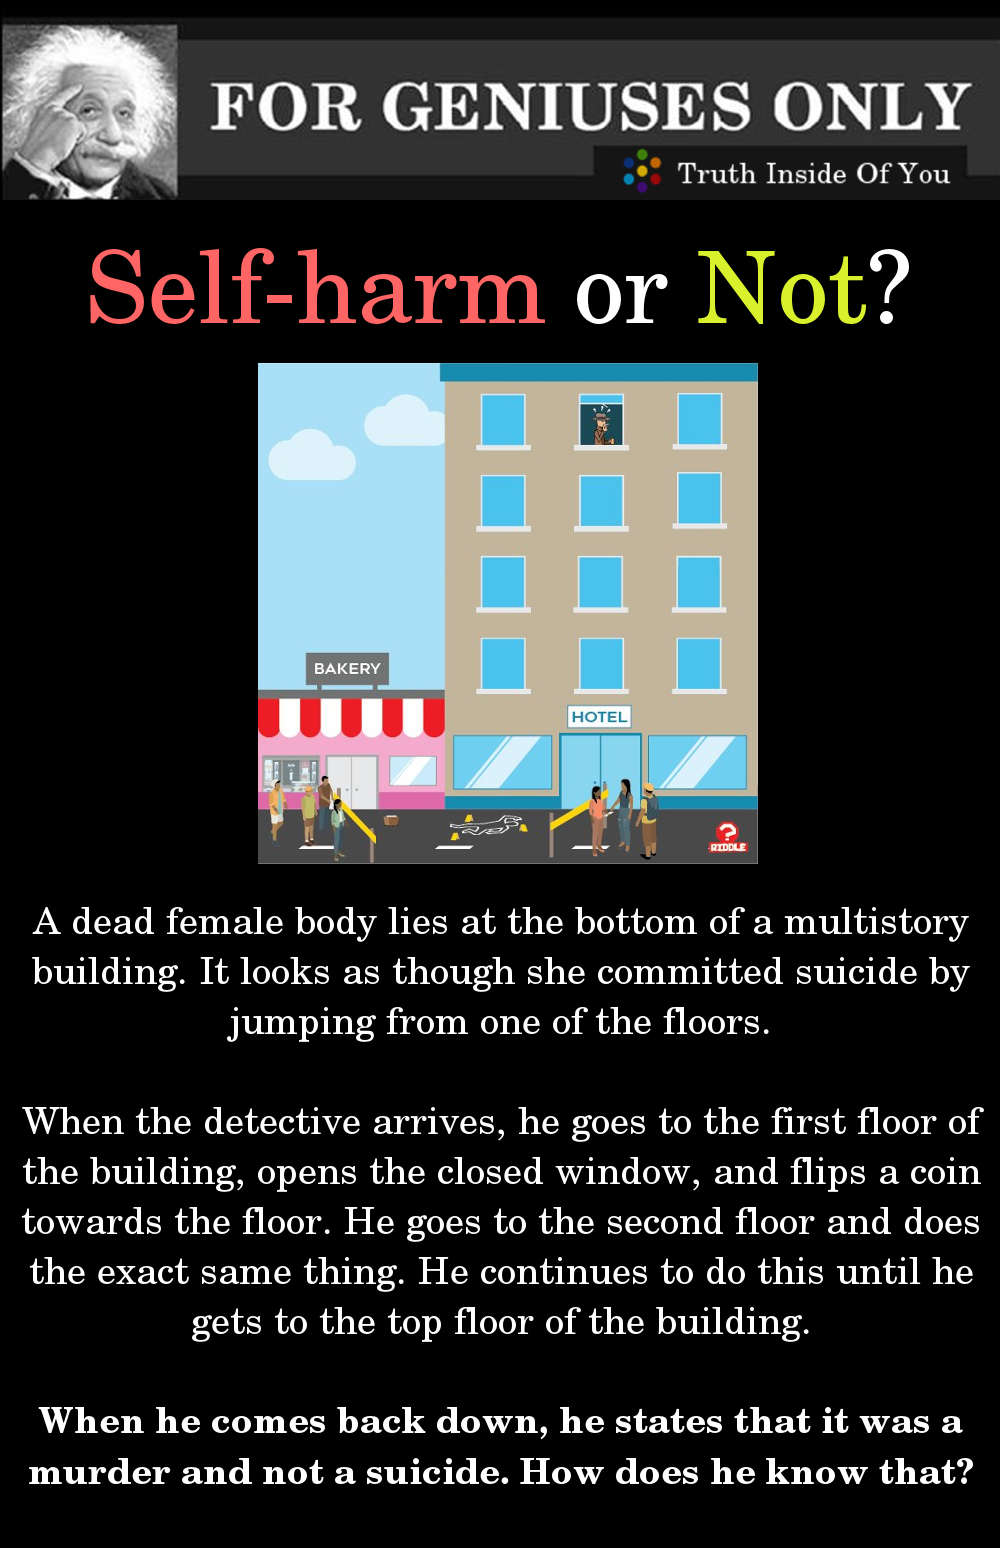 self harm or not?